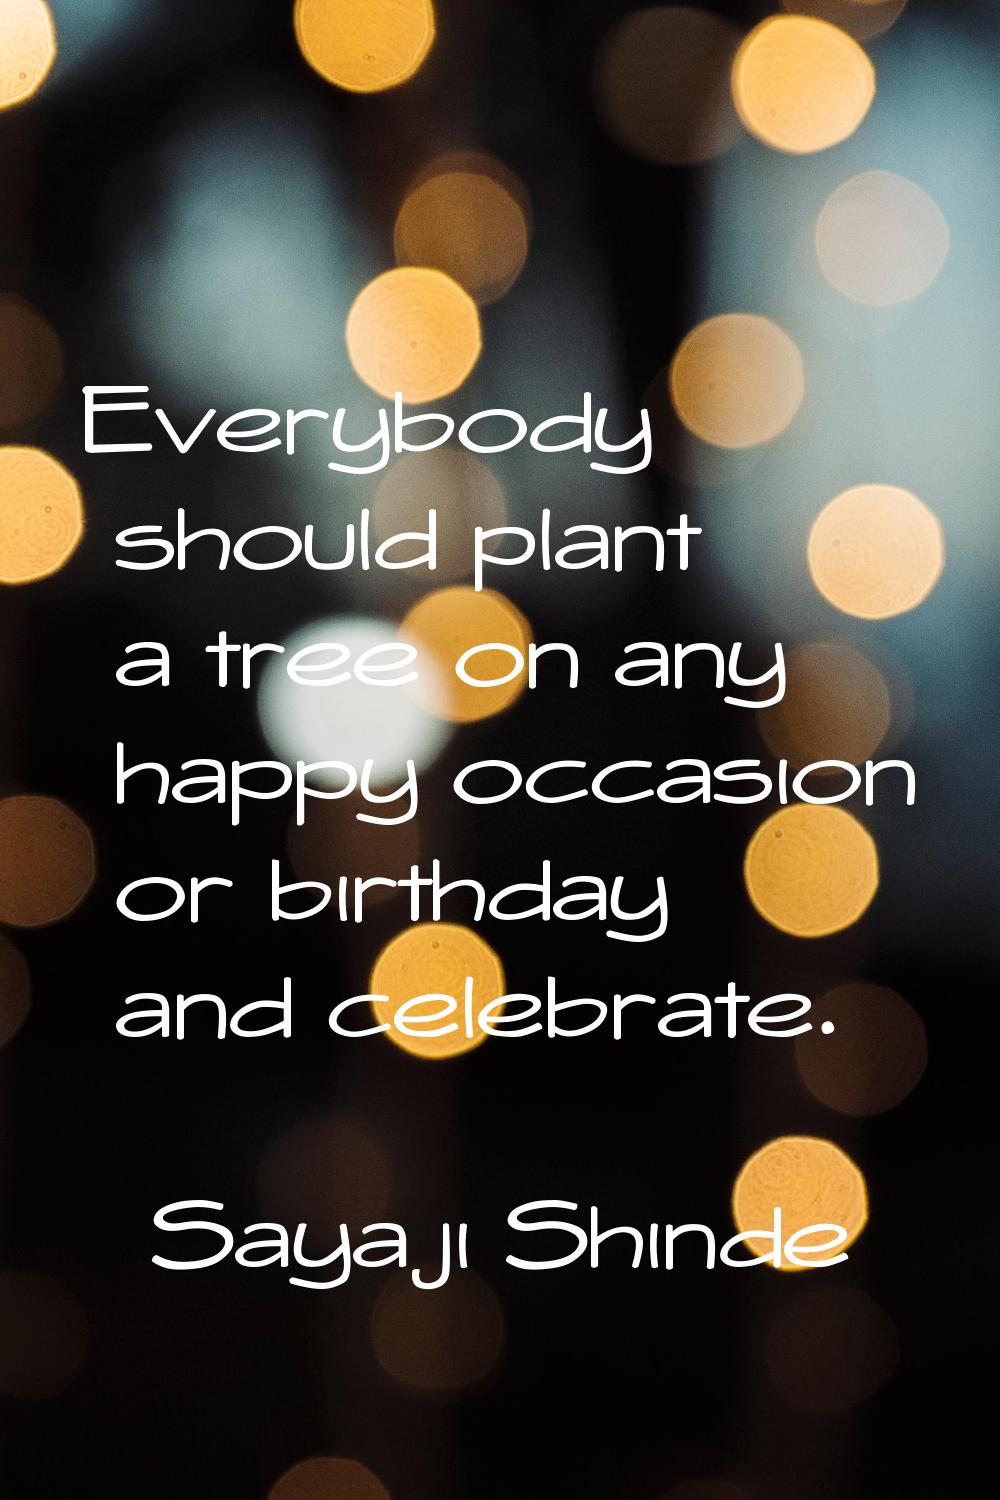 Everybody should plant a tree on any happy occasion or birthday and celebrate.